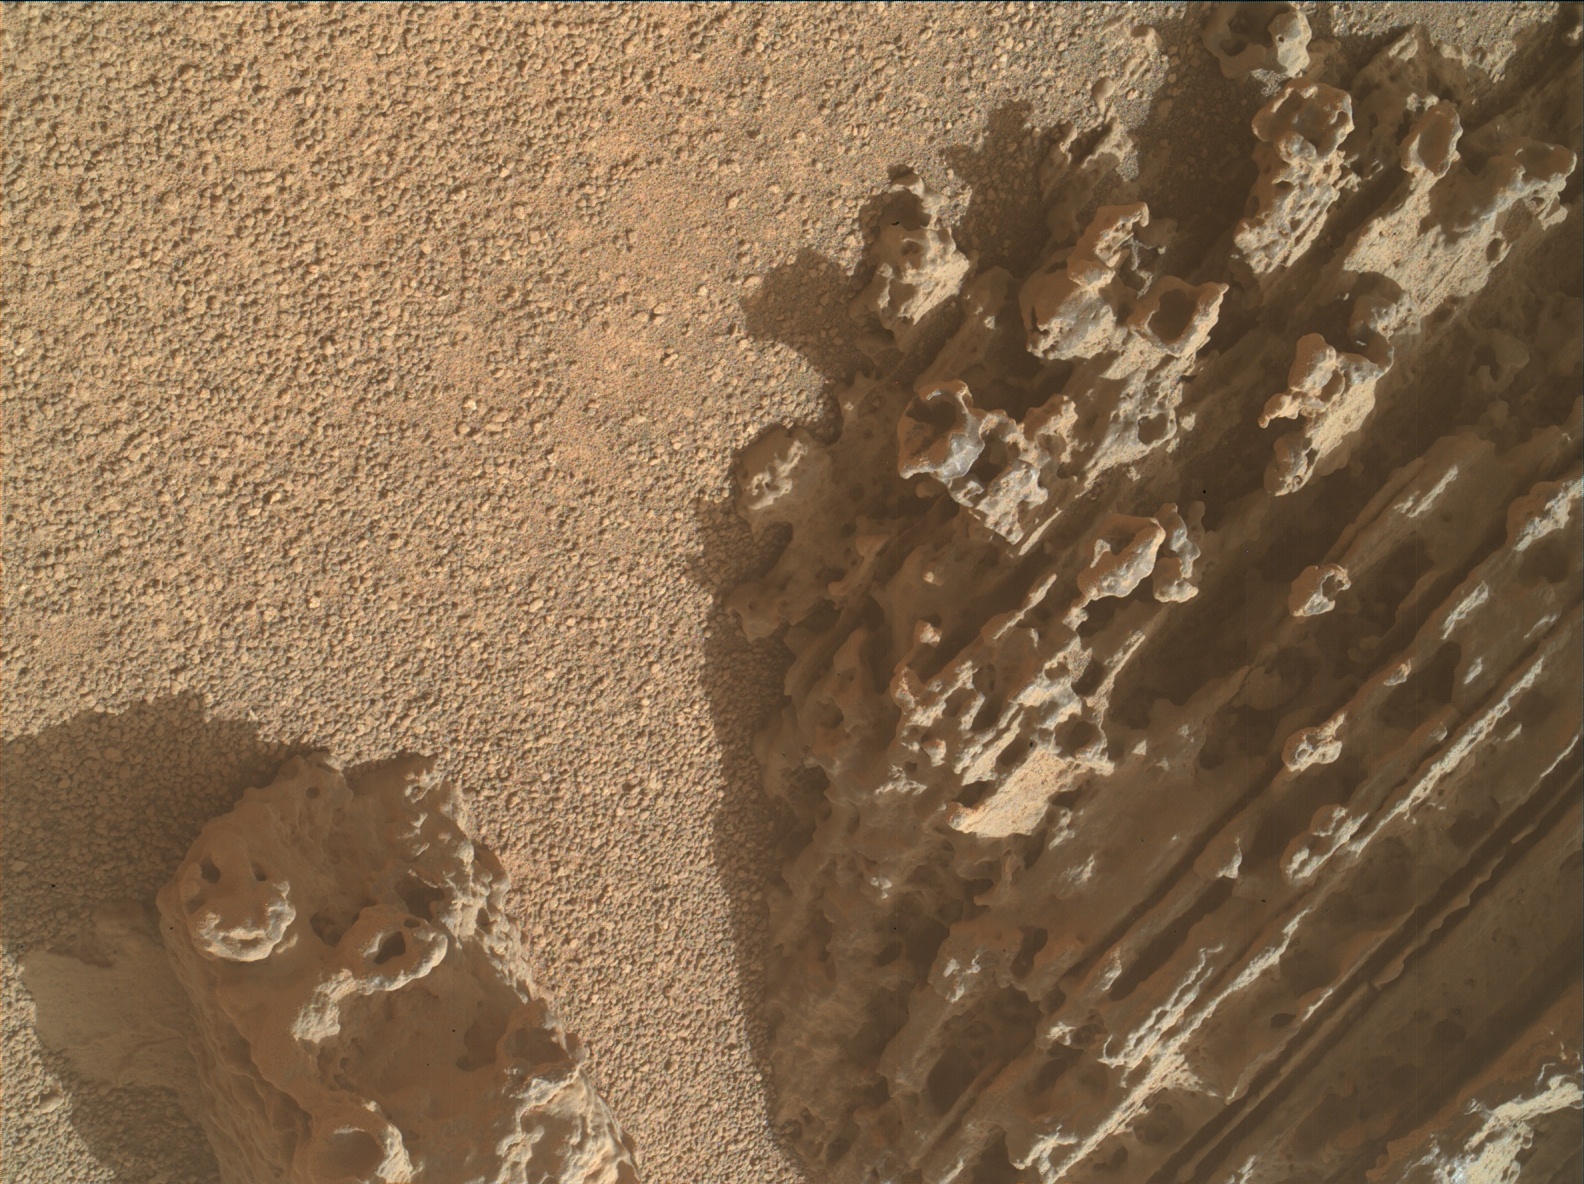 Nasa's Mars rover Curiosity acquired this image using its Mars Hand Lens Imager (MAHLI) on Sol 3690